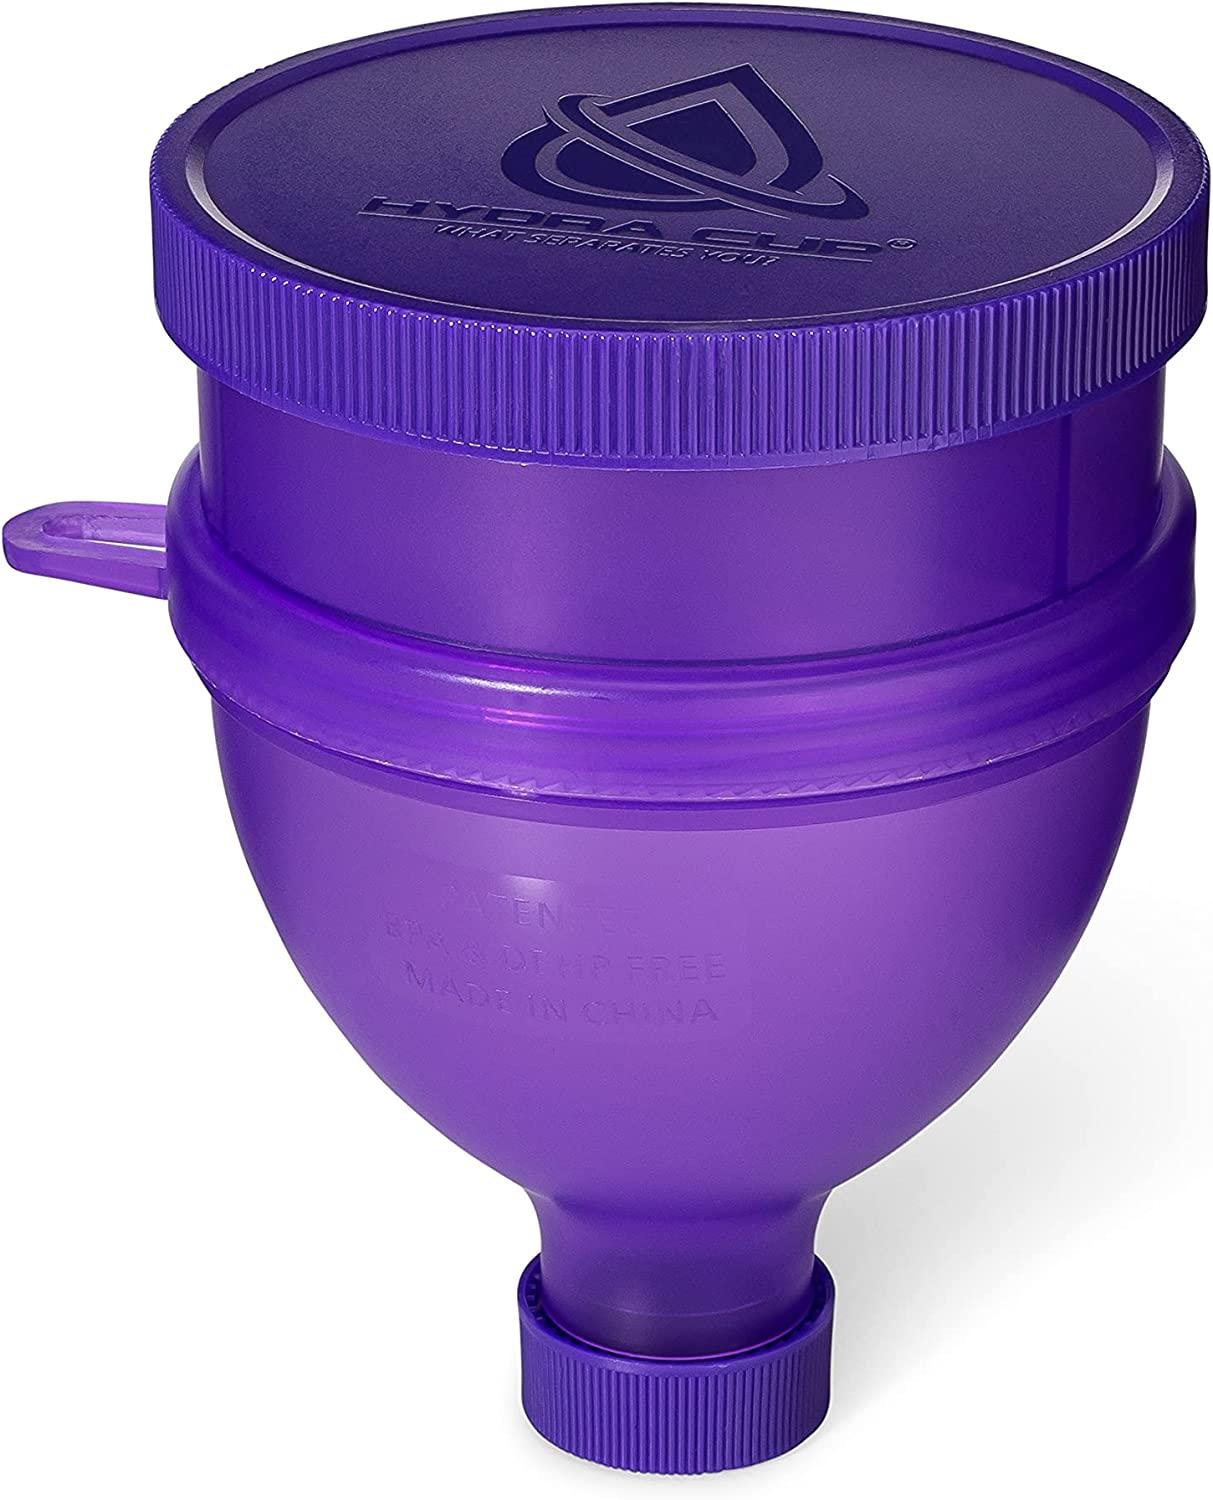 Hydra Cup [4 PACK] - Protein Powder Funnel w/ three compartments, pill & supplement  storage container & dispenser, pair w/ shaker bottle on the go for pre/post  workout (Purple/Pink/White/Gold/Green) Purple, Pink, White/Gol…